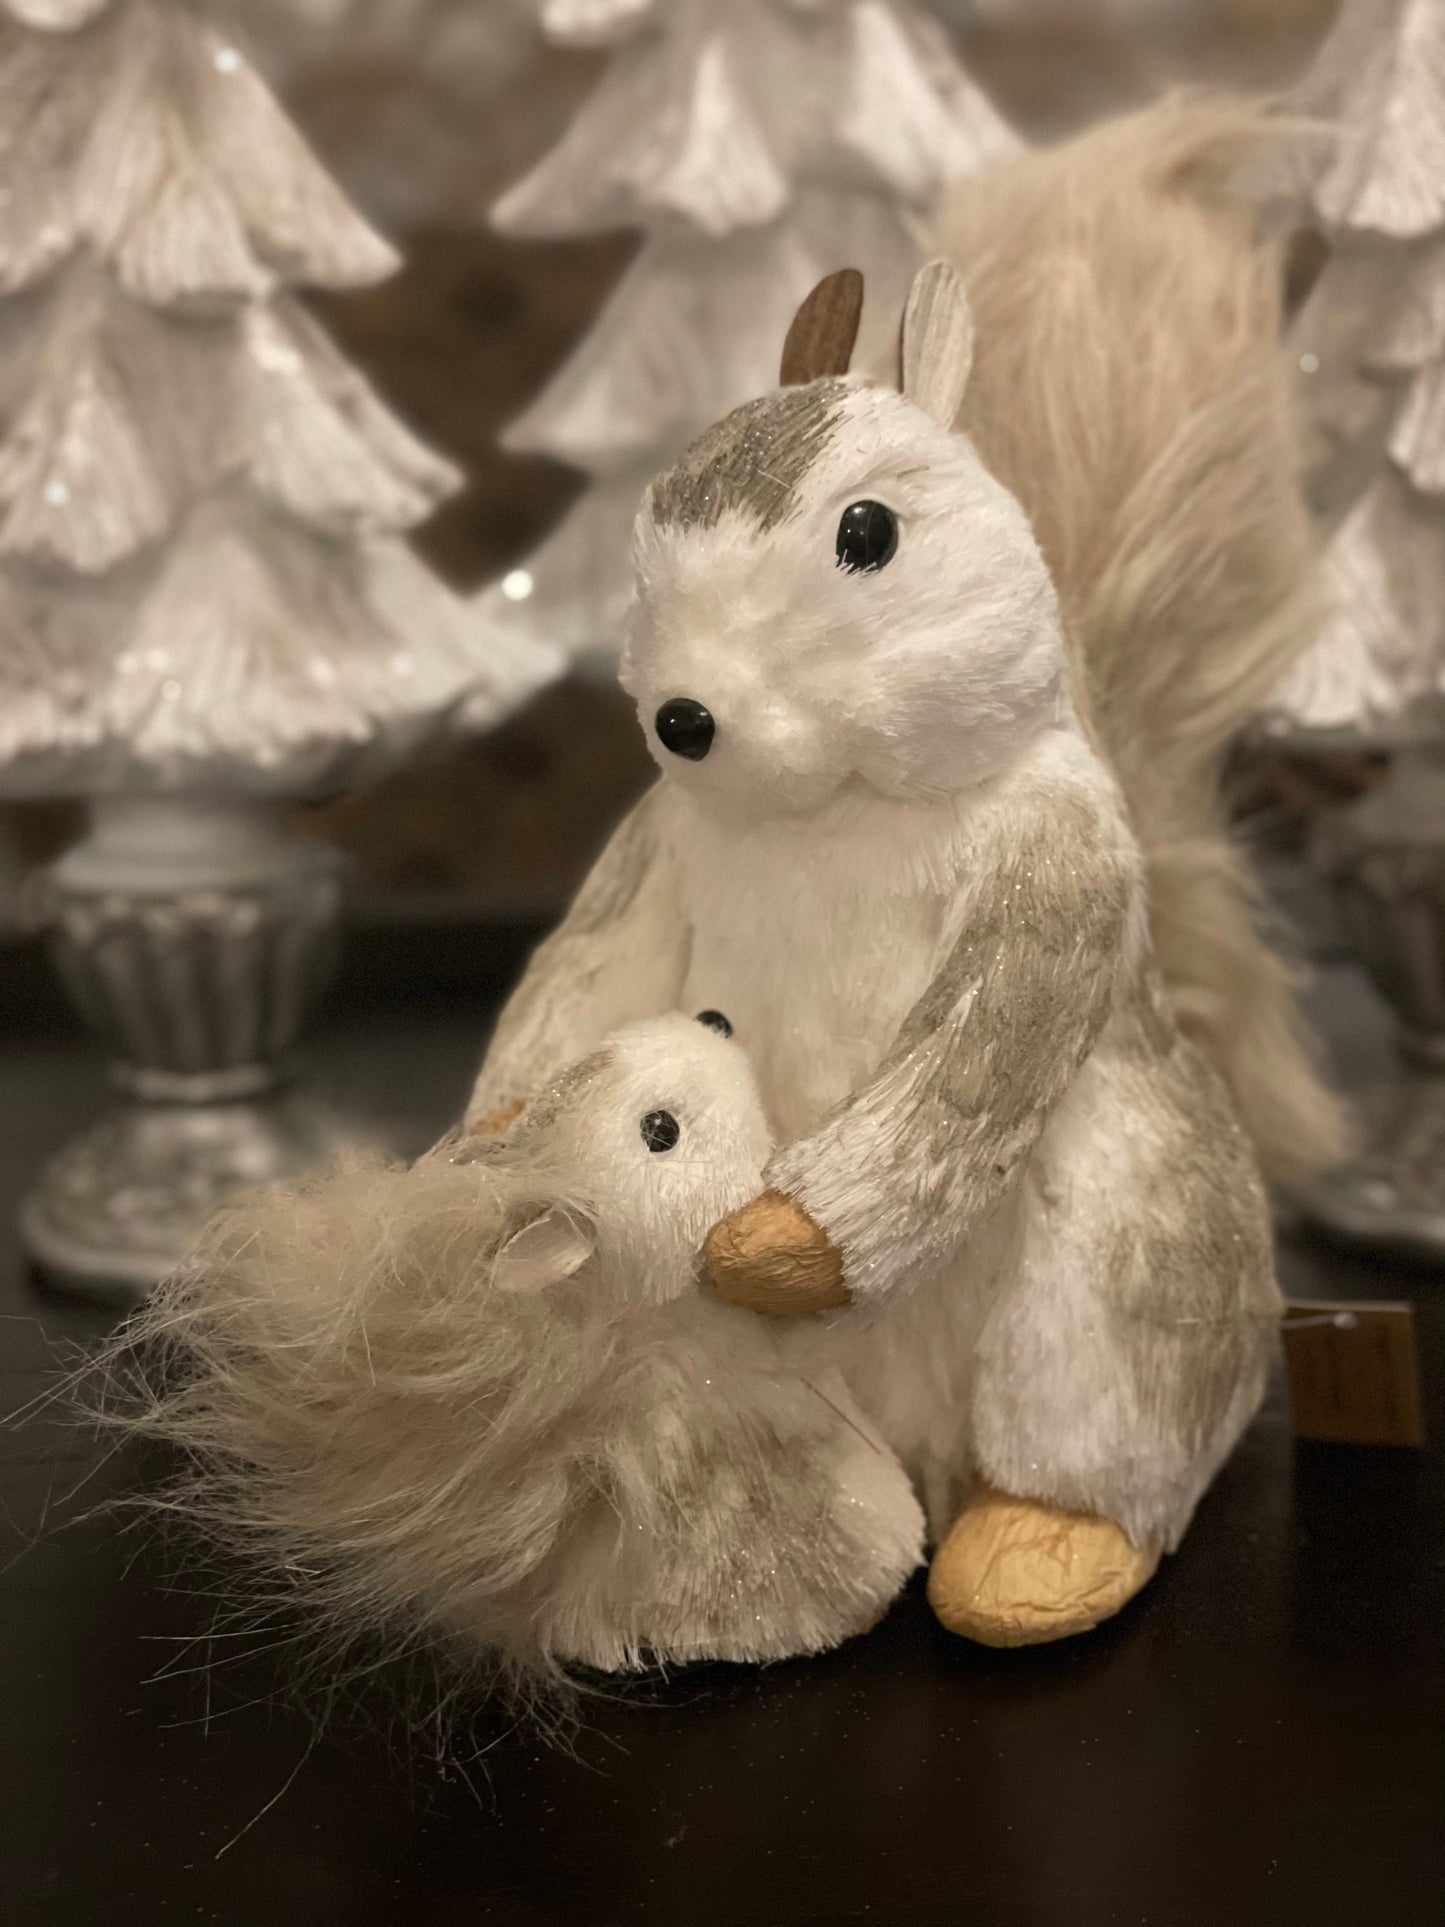 9.75” squirrel with baby ornament.